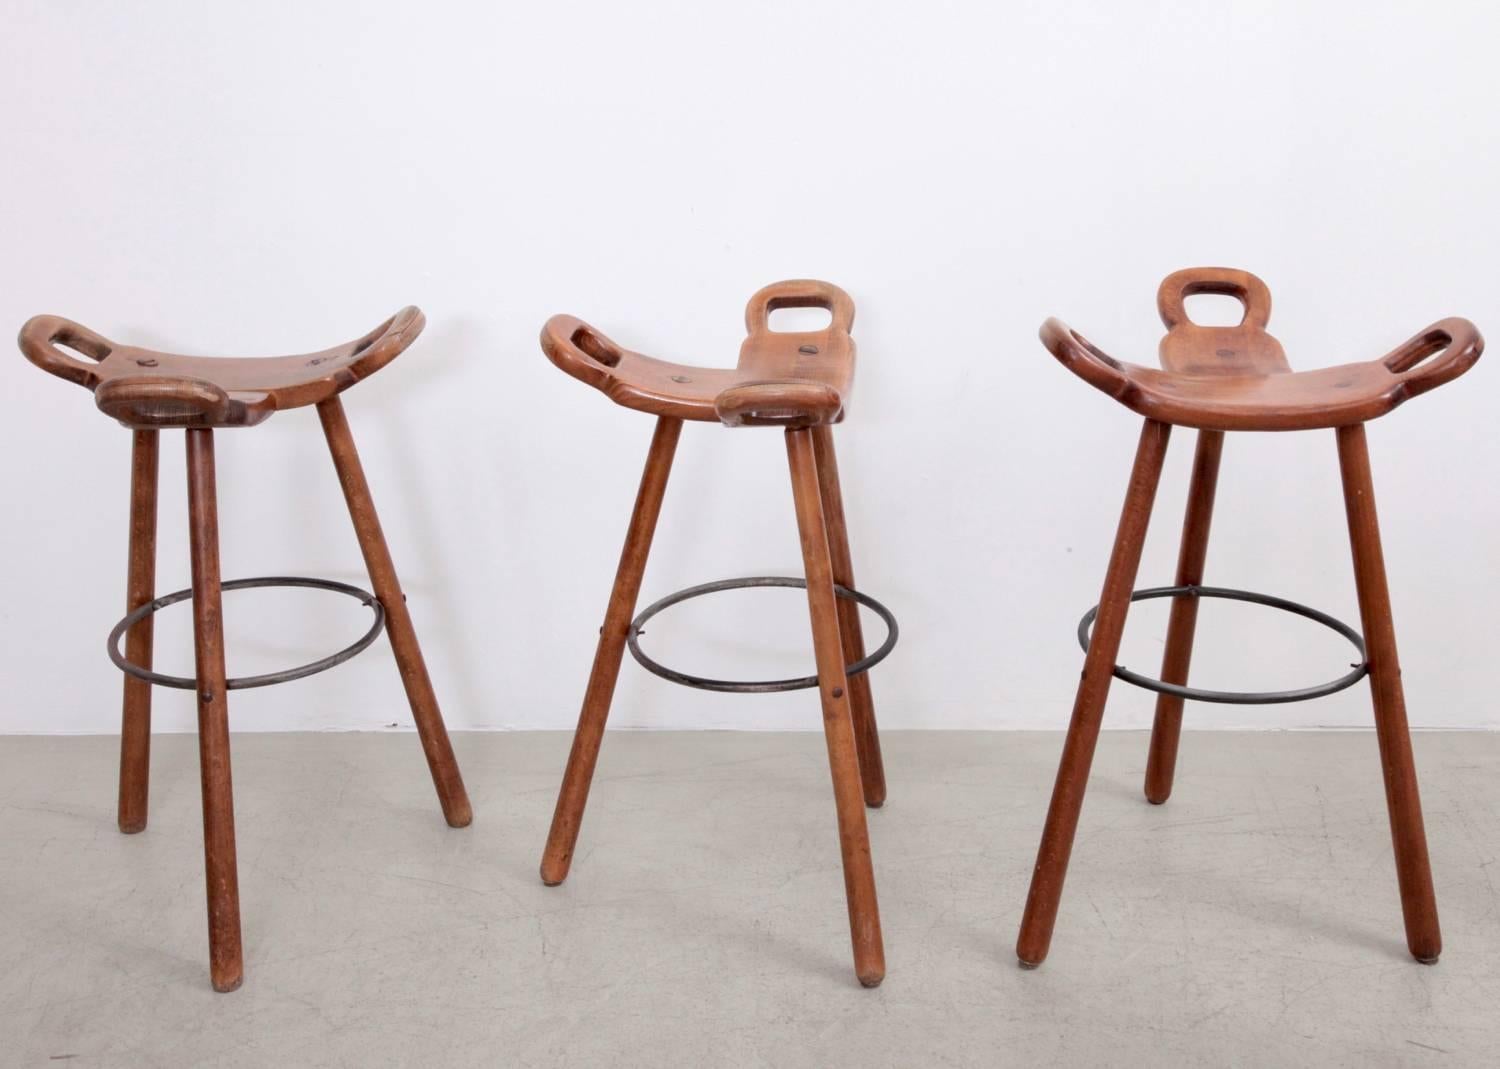 Set of six 'Brutalist' or 'Marbella' bar stools, in stained beech and metal, Spain, 1970s. 

Set of six Brutalist bar stools in brown stained beech. The eye-catching part is the seating. A curved T-shape with three handles. The handles are not